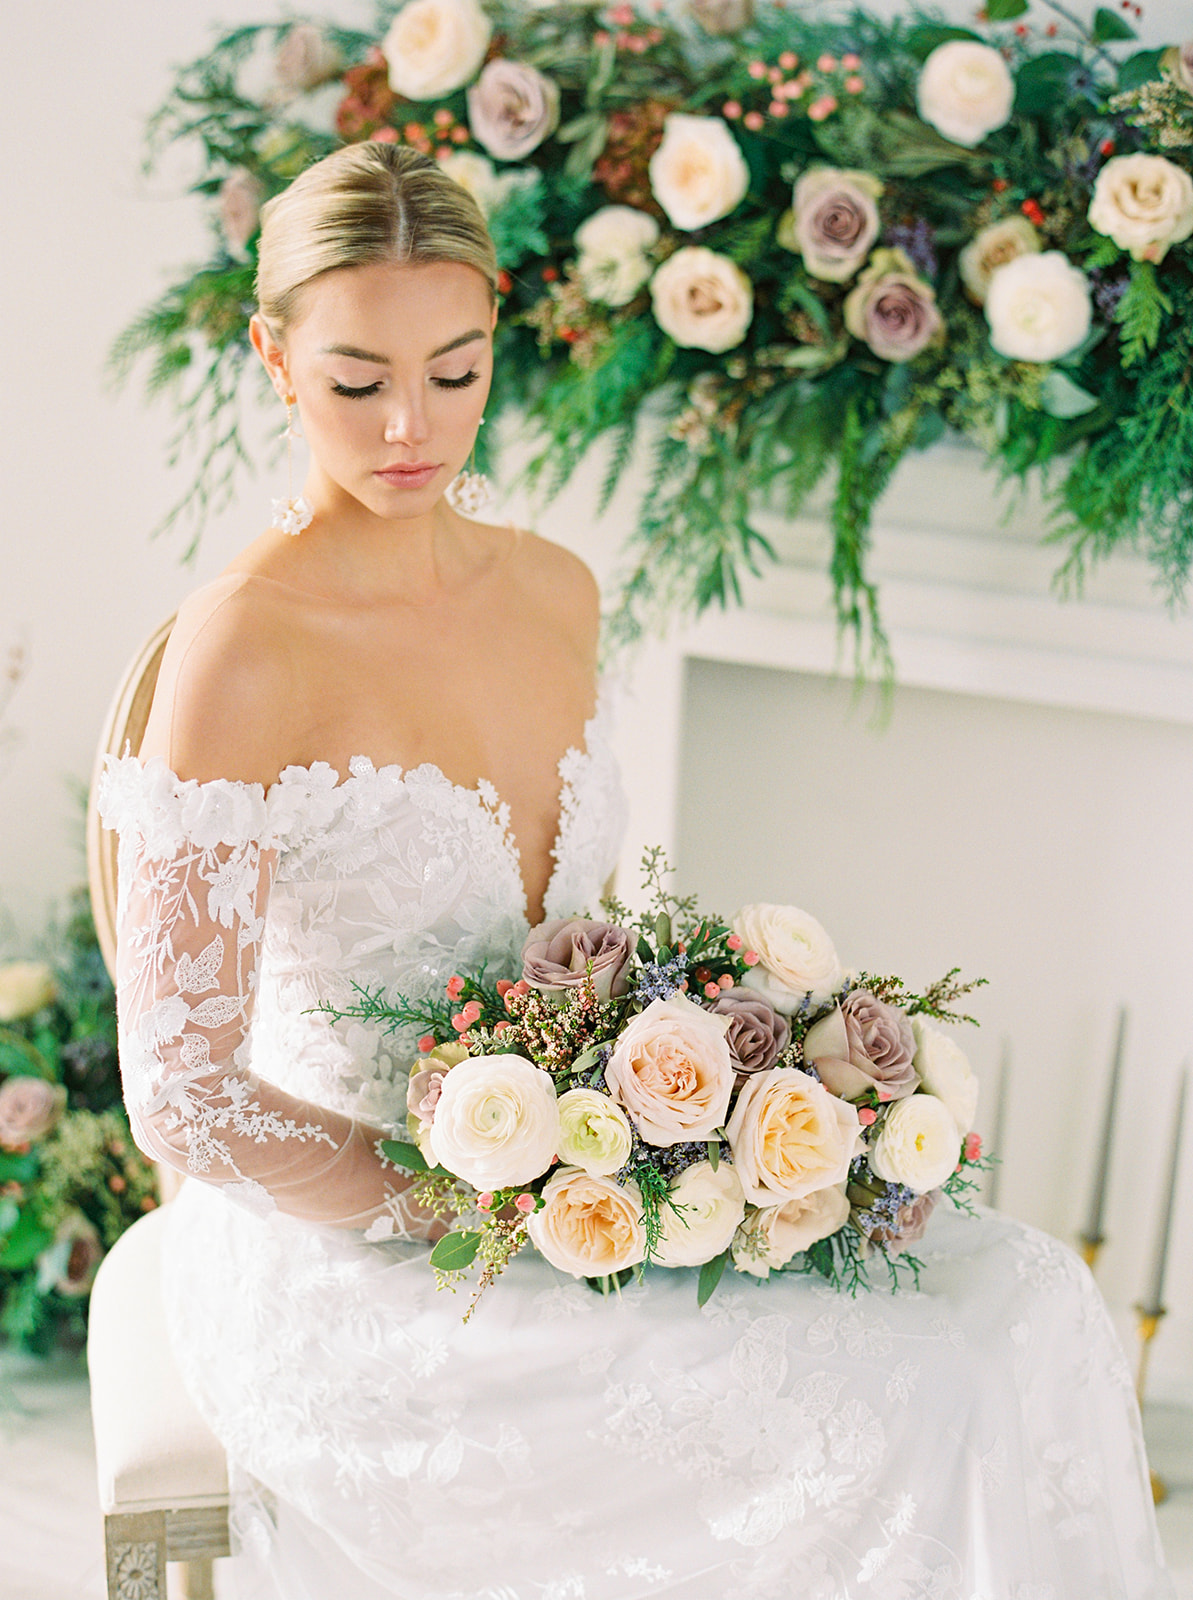 Off the shoulder gown with white lace details and a winter wedding bouquet